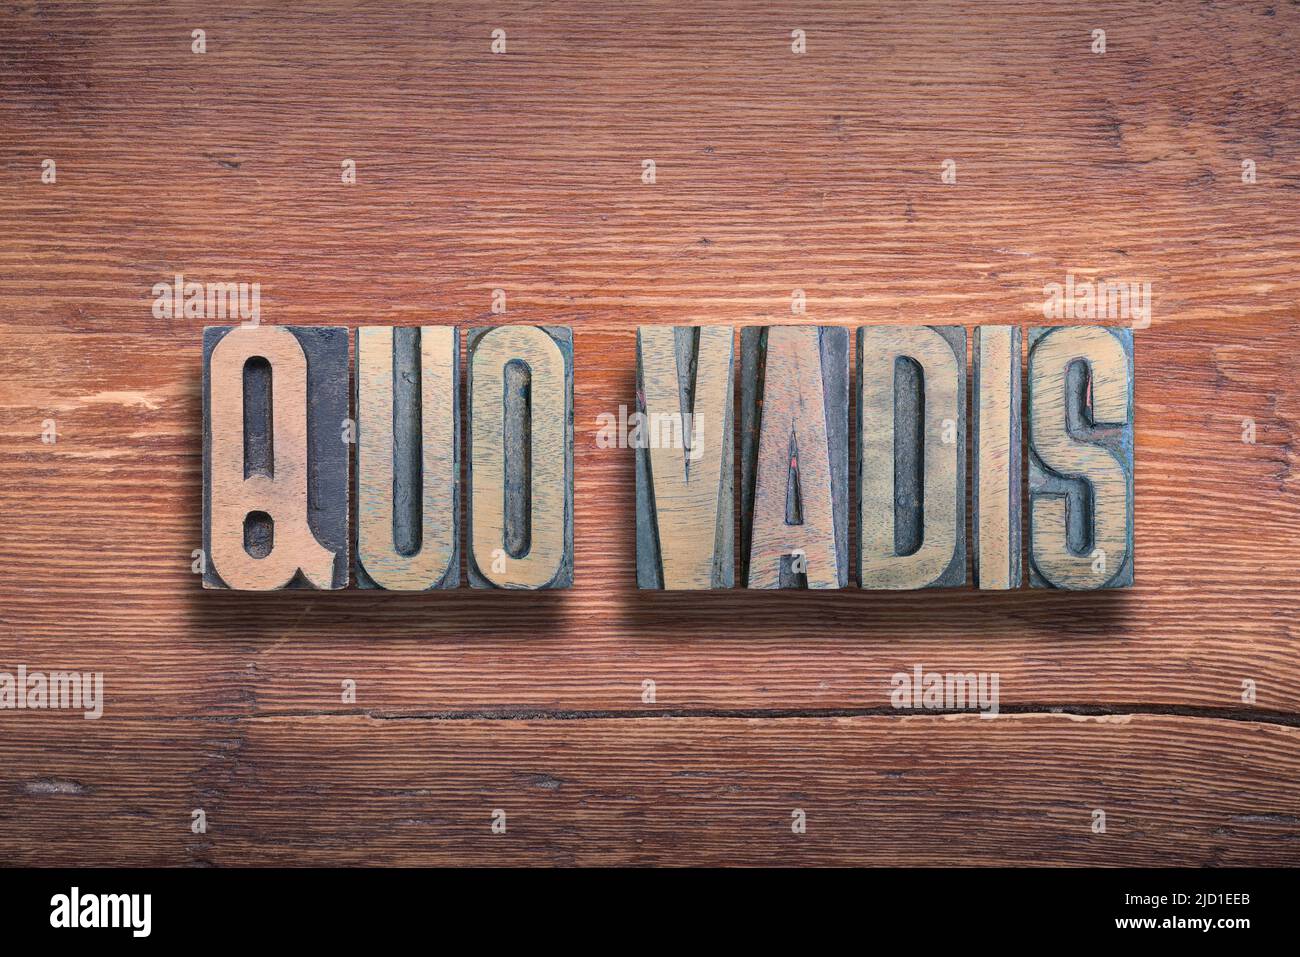 quo vadis ancient Latin saying meaning - where are you going, combined on vintage varnished wooden surface Stock Photo